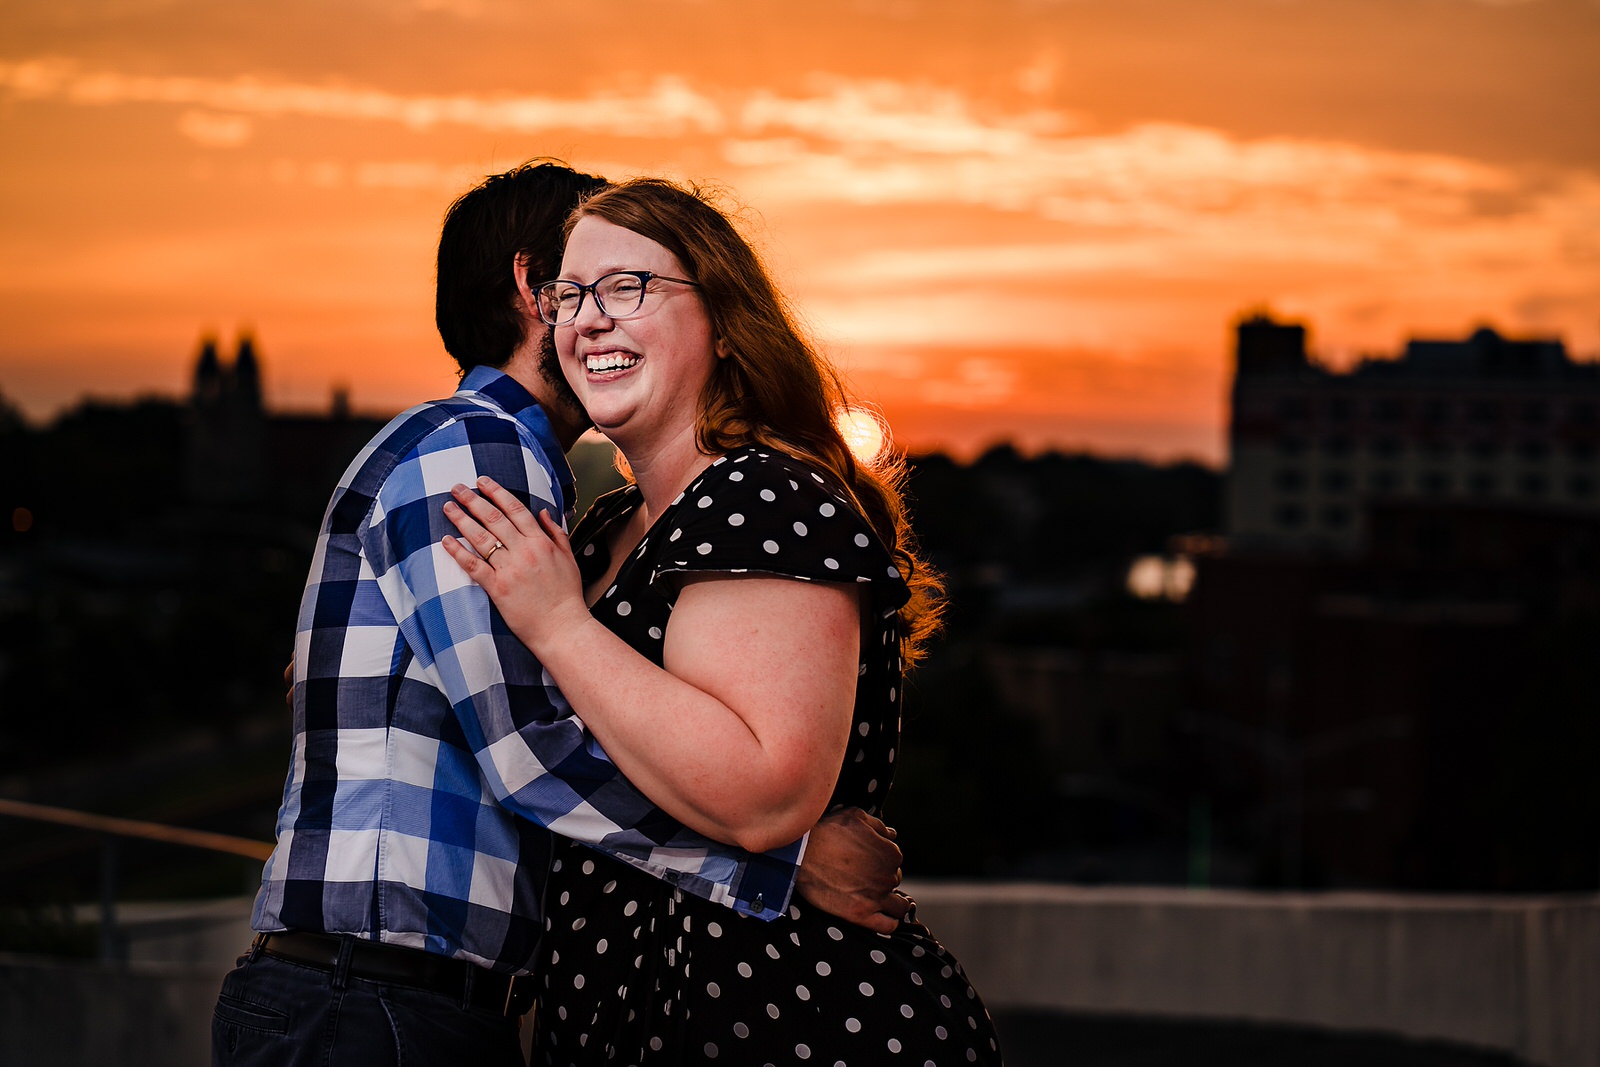 A couple embraces in front of the backdrop of an orange sunset